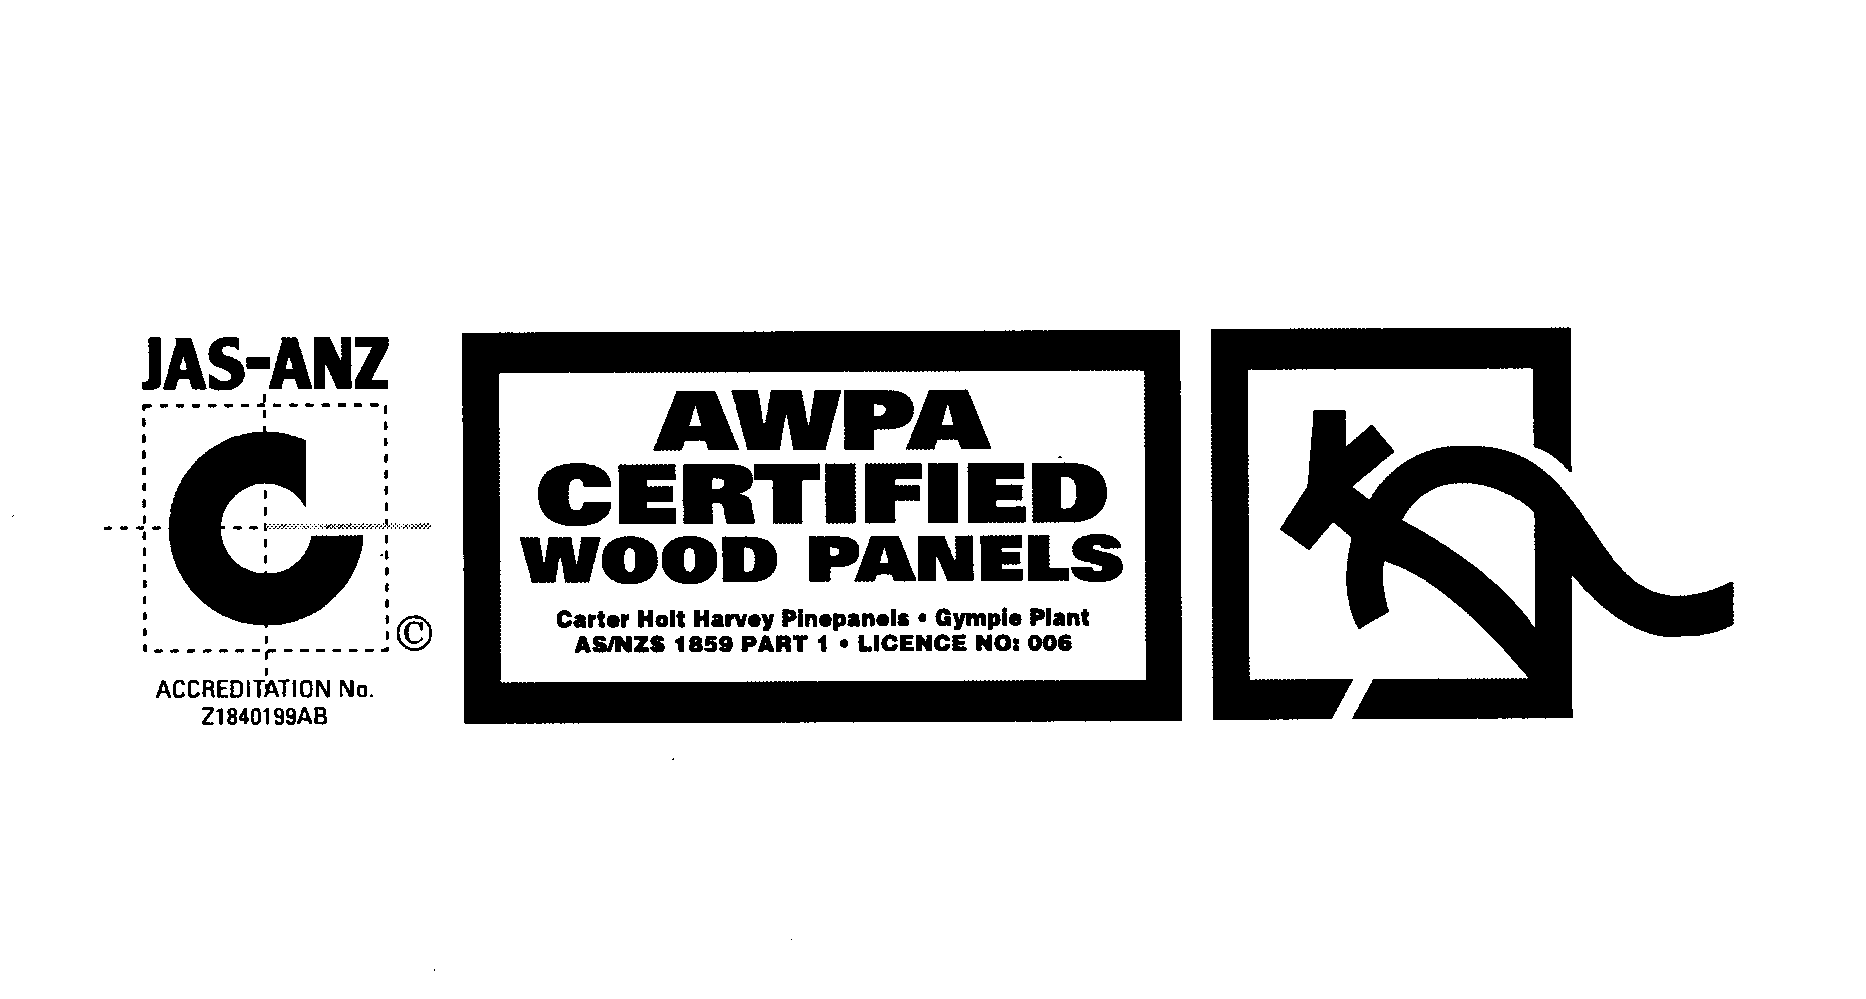 (a) sample label for australian-made wood panel products